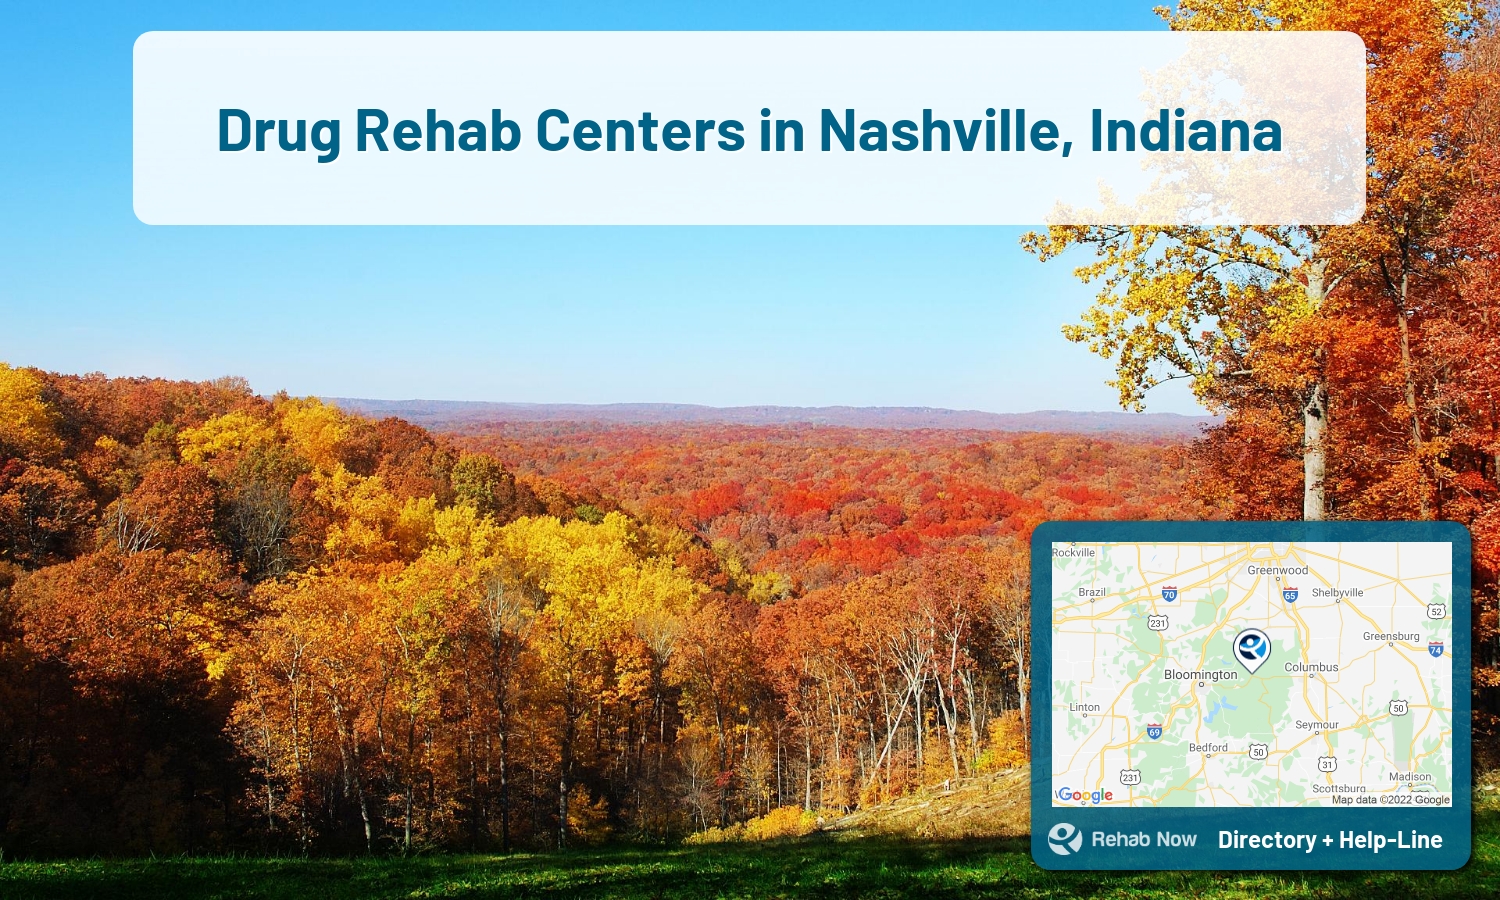 Nashville, IN Treatment Centers. Find drug rehab in Nashville, Indiana, or detox and treatment programs. Get the right help now!